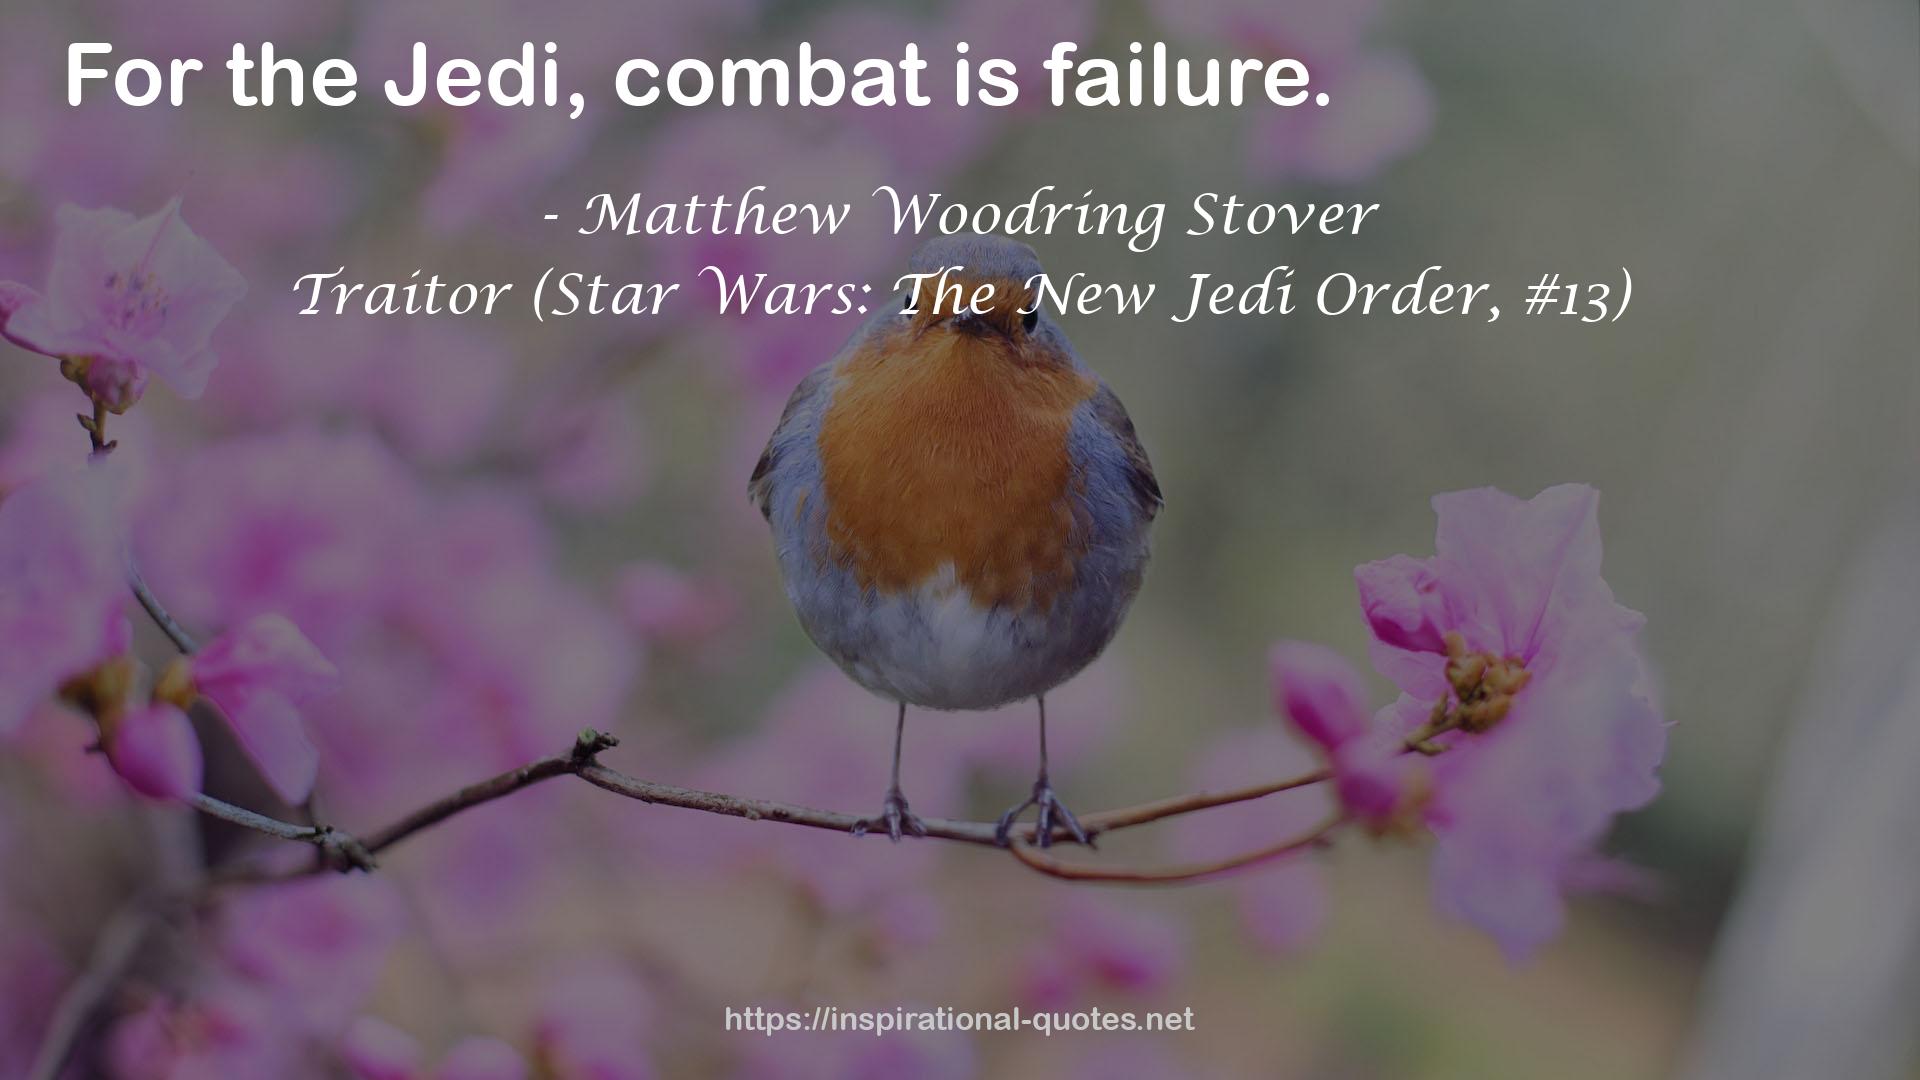 Matthew Woodring Stover QUOTES